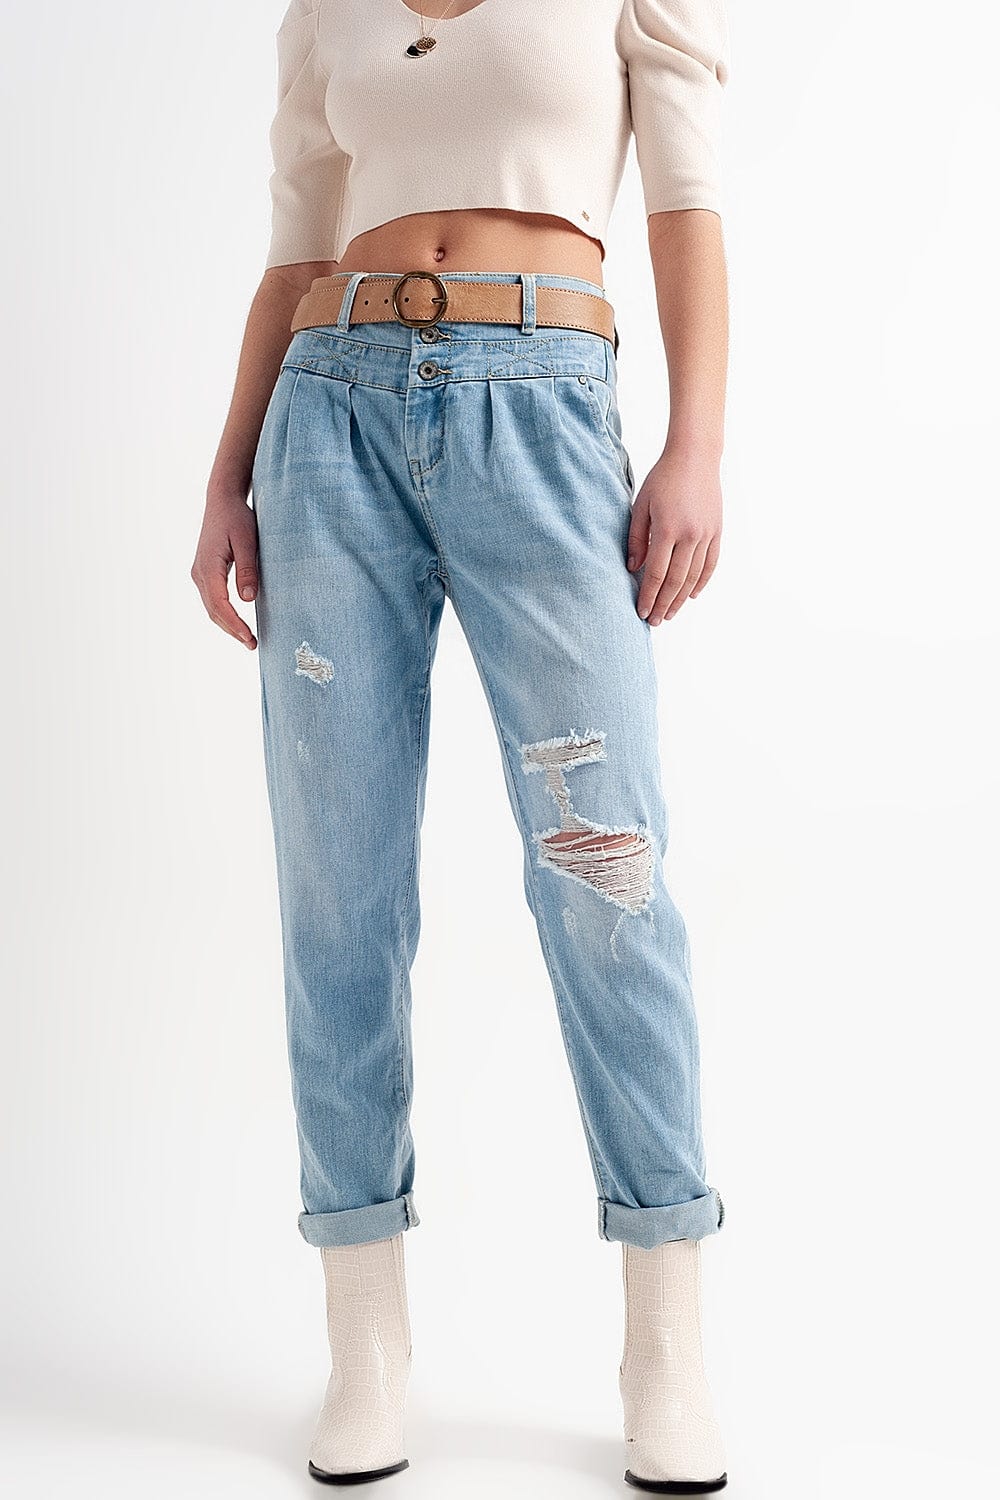 Q2 Women's Jean Jean with Double Waistband in Blue with Rips